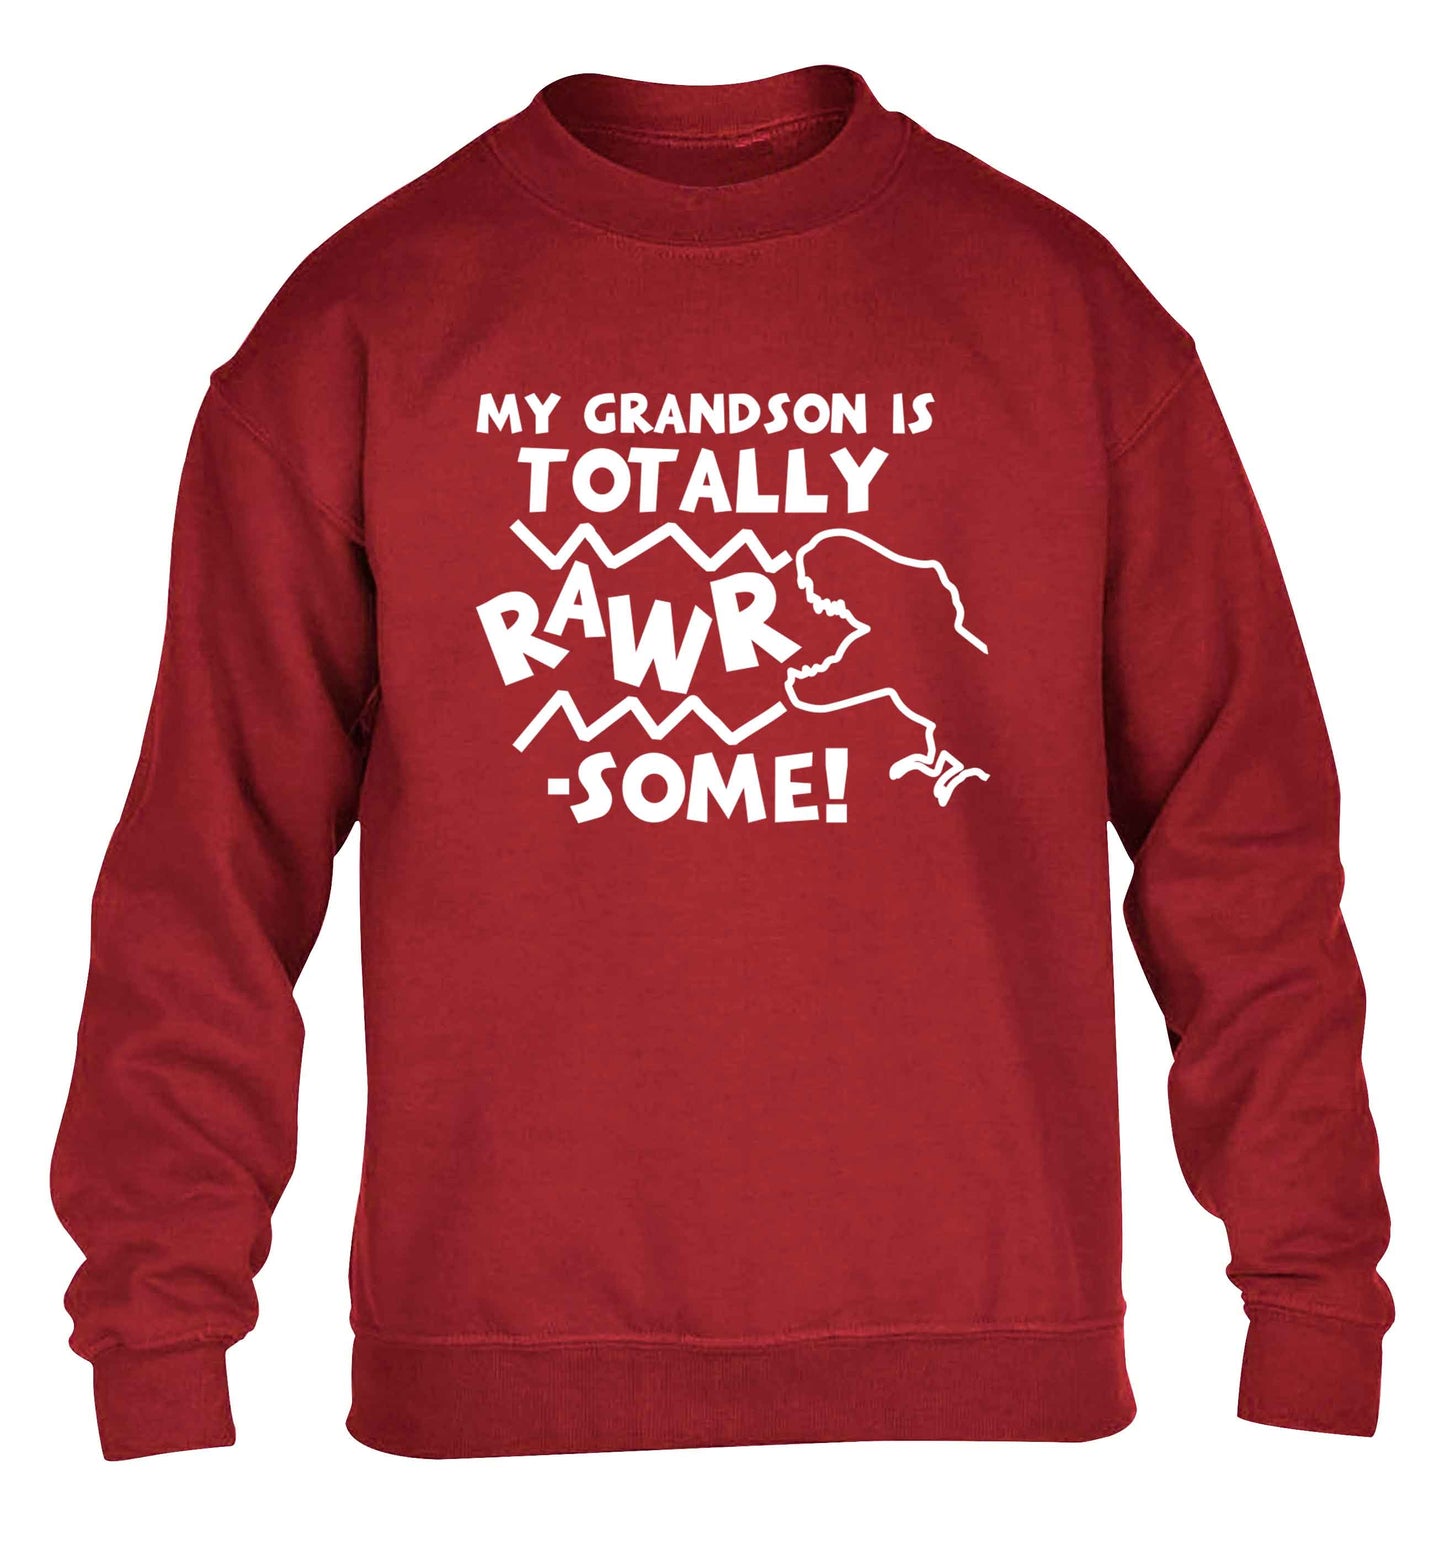 My grandson is totally rawrsome children's grey sweater 12-13 Years